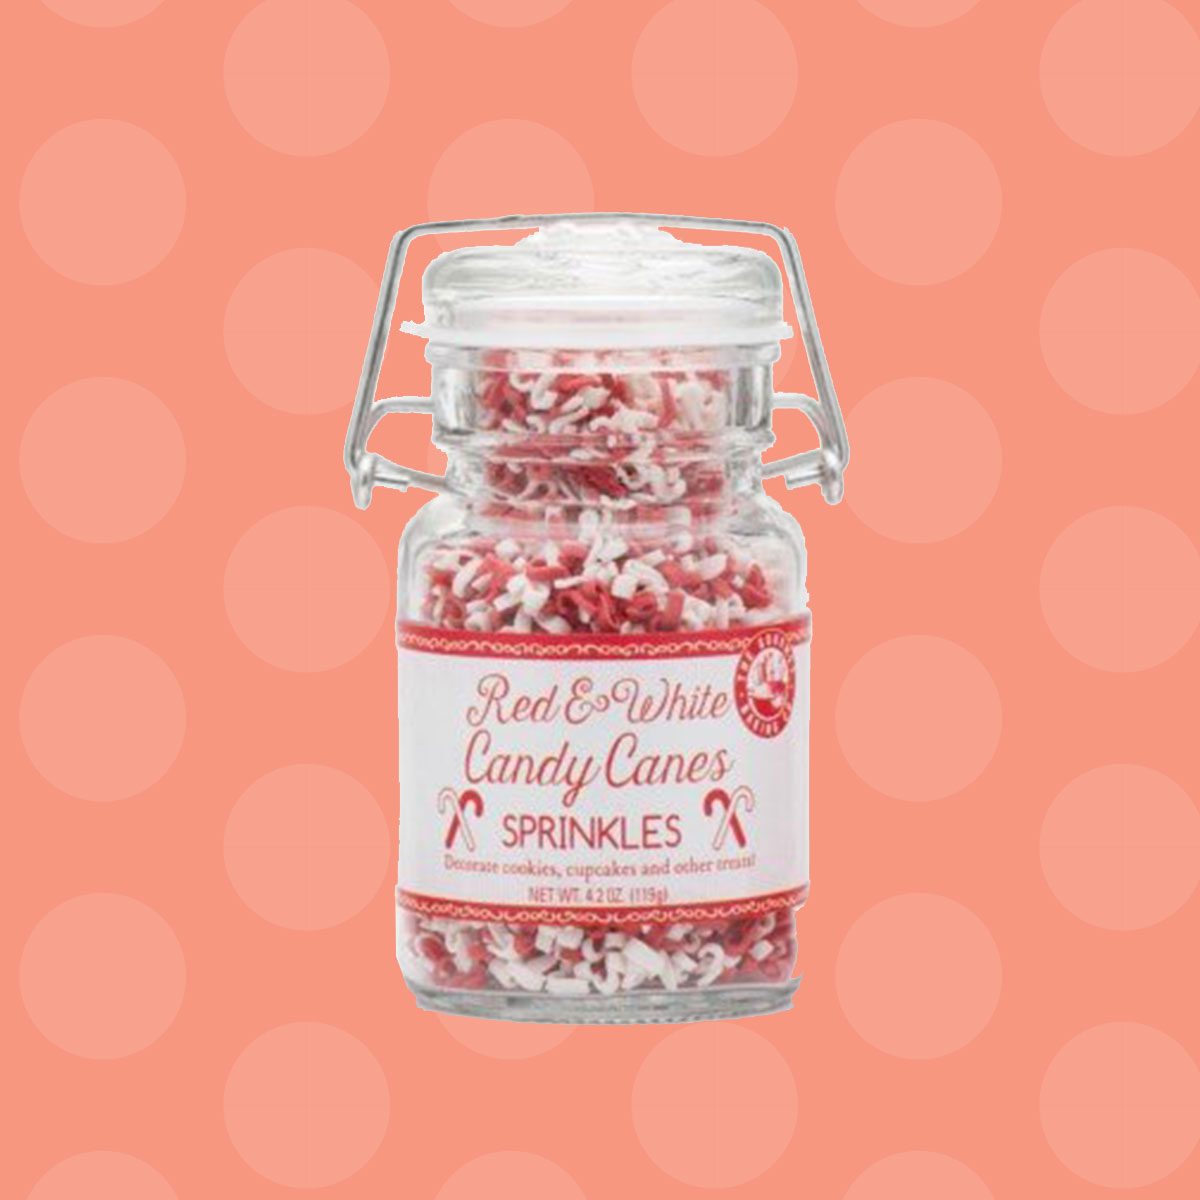 Pepper Creek Farms Sprinkles, Red and White Candy Cane, 4.2 Ounce